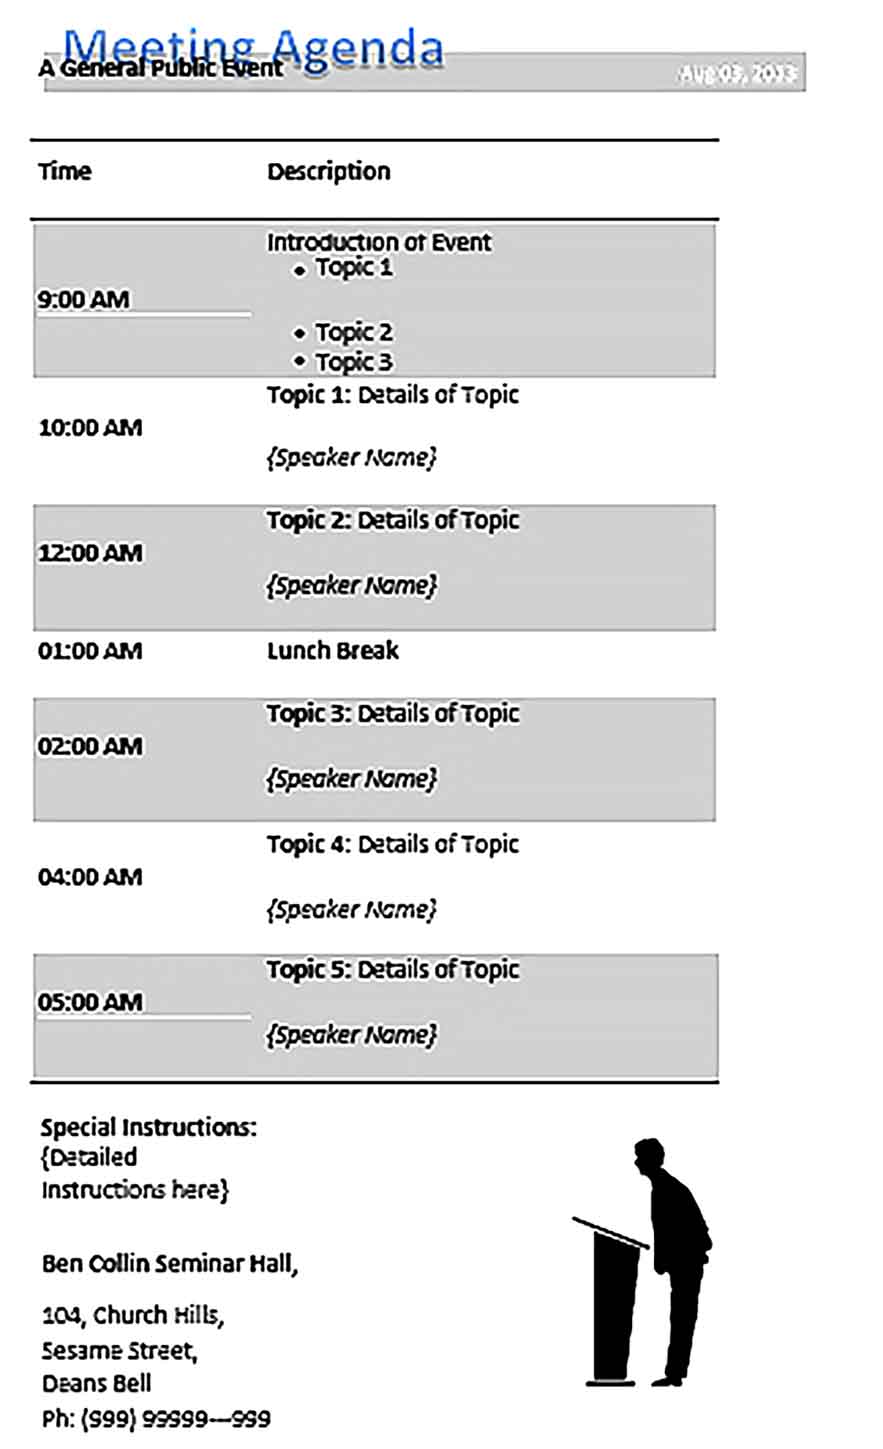 Template Meeting Agenda Public Event Conference Schedule Sample